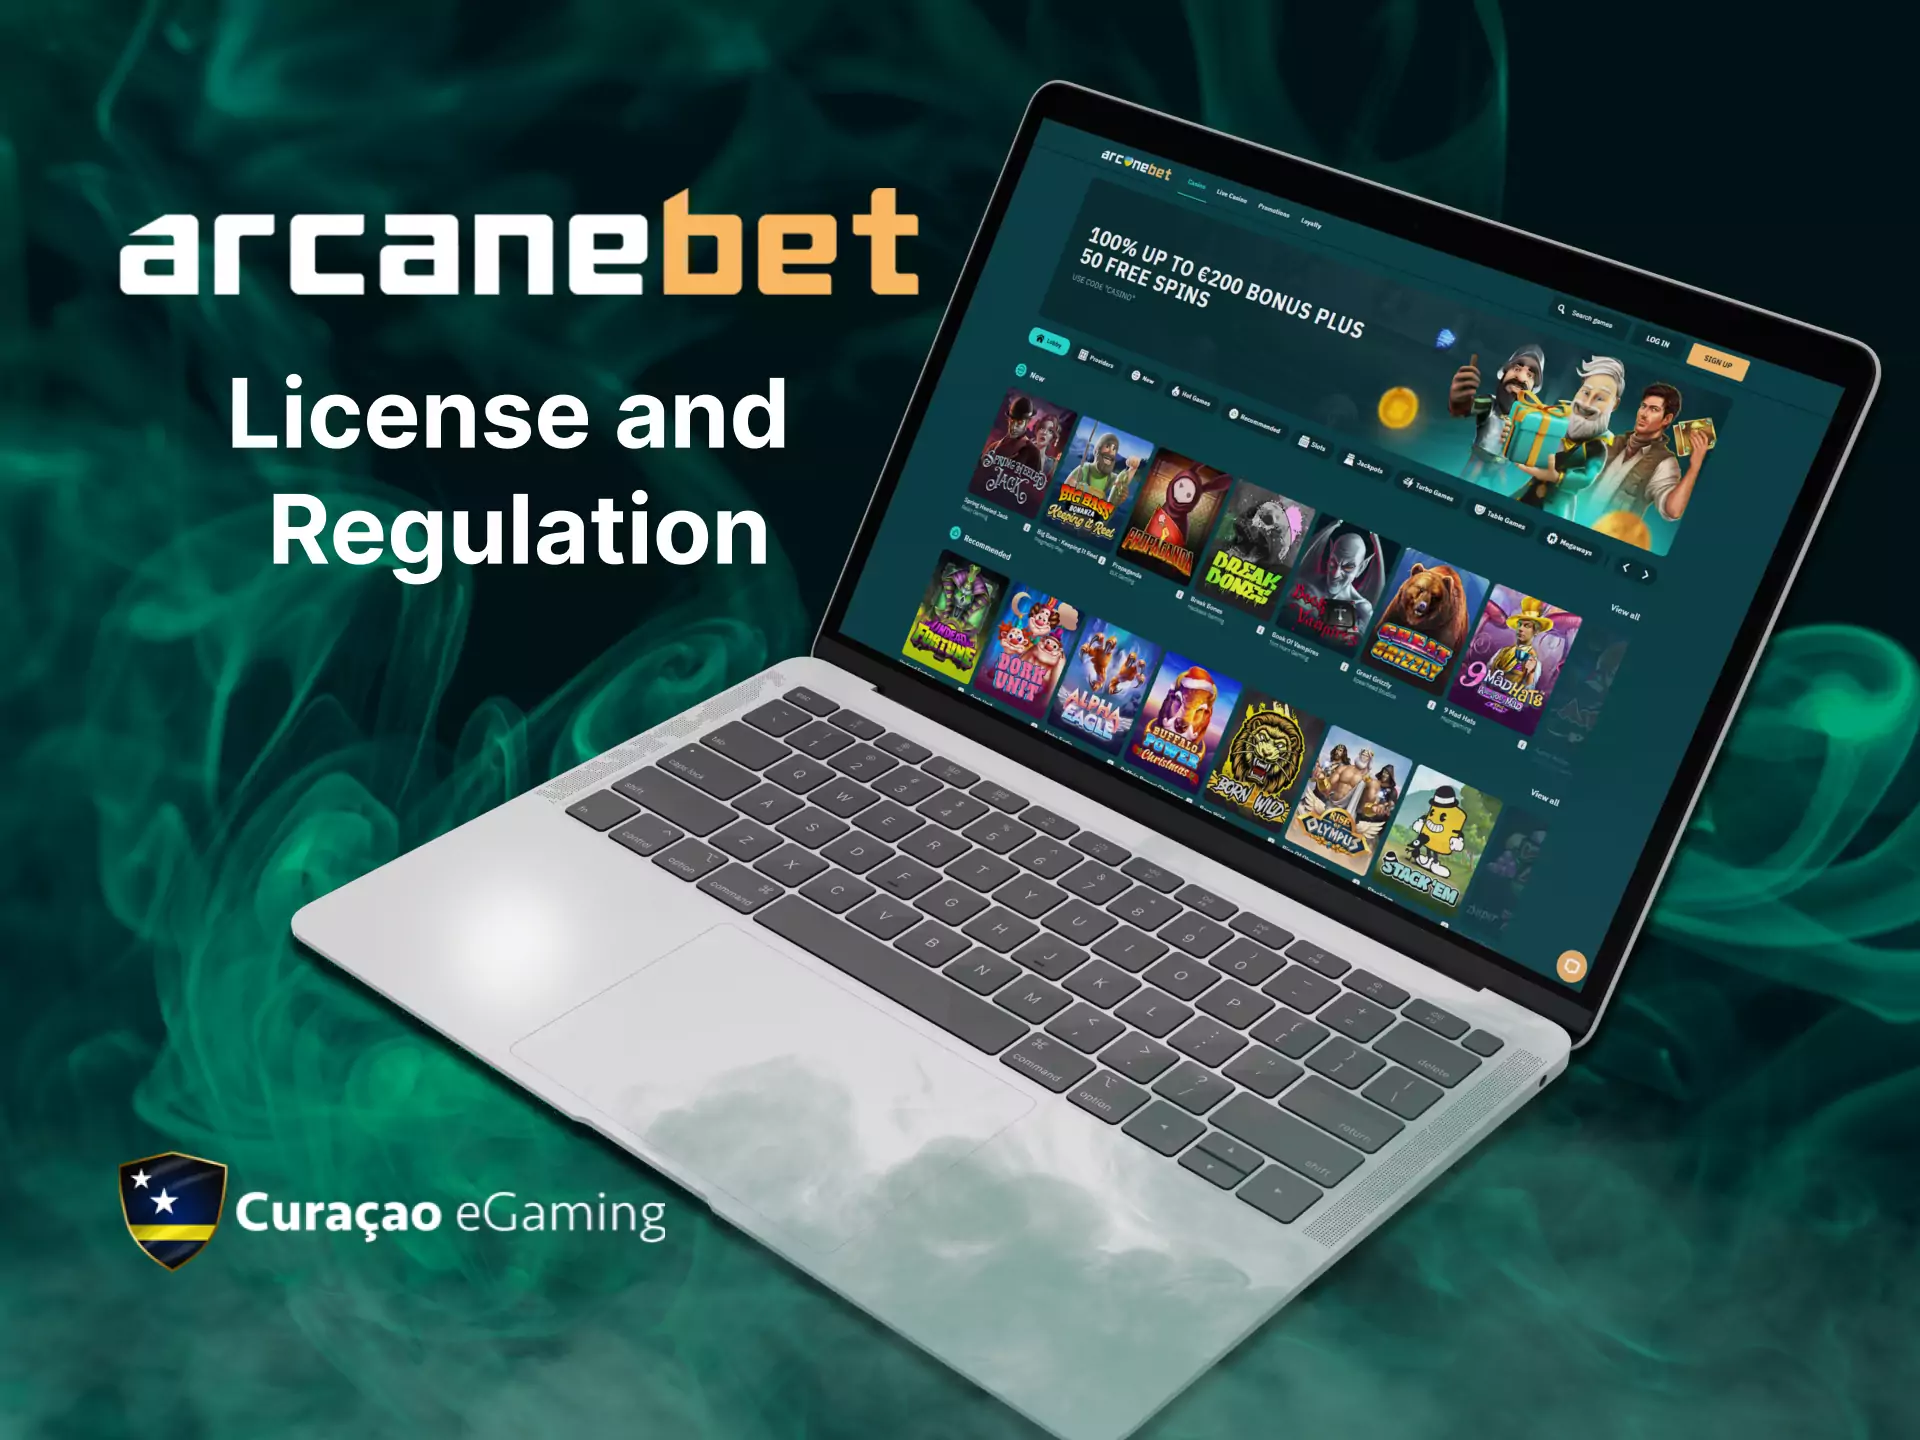 Use Arcanebet without fear, it is legal and safe.